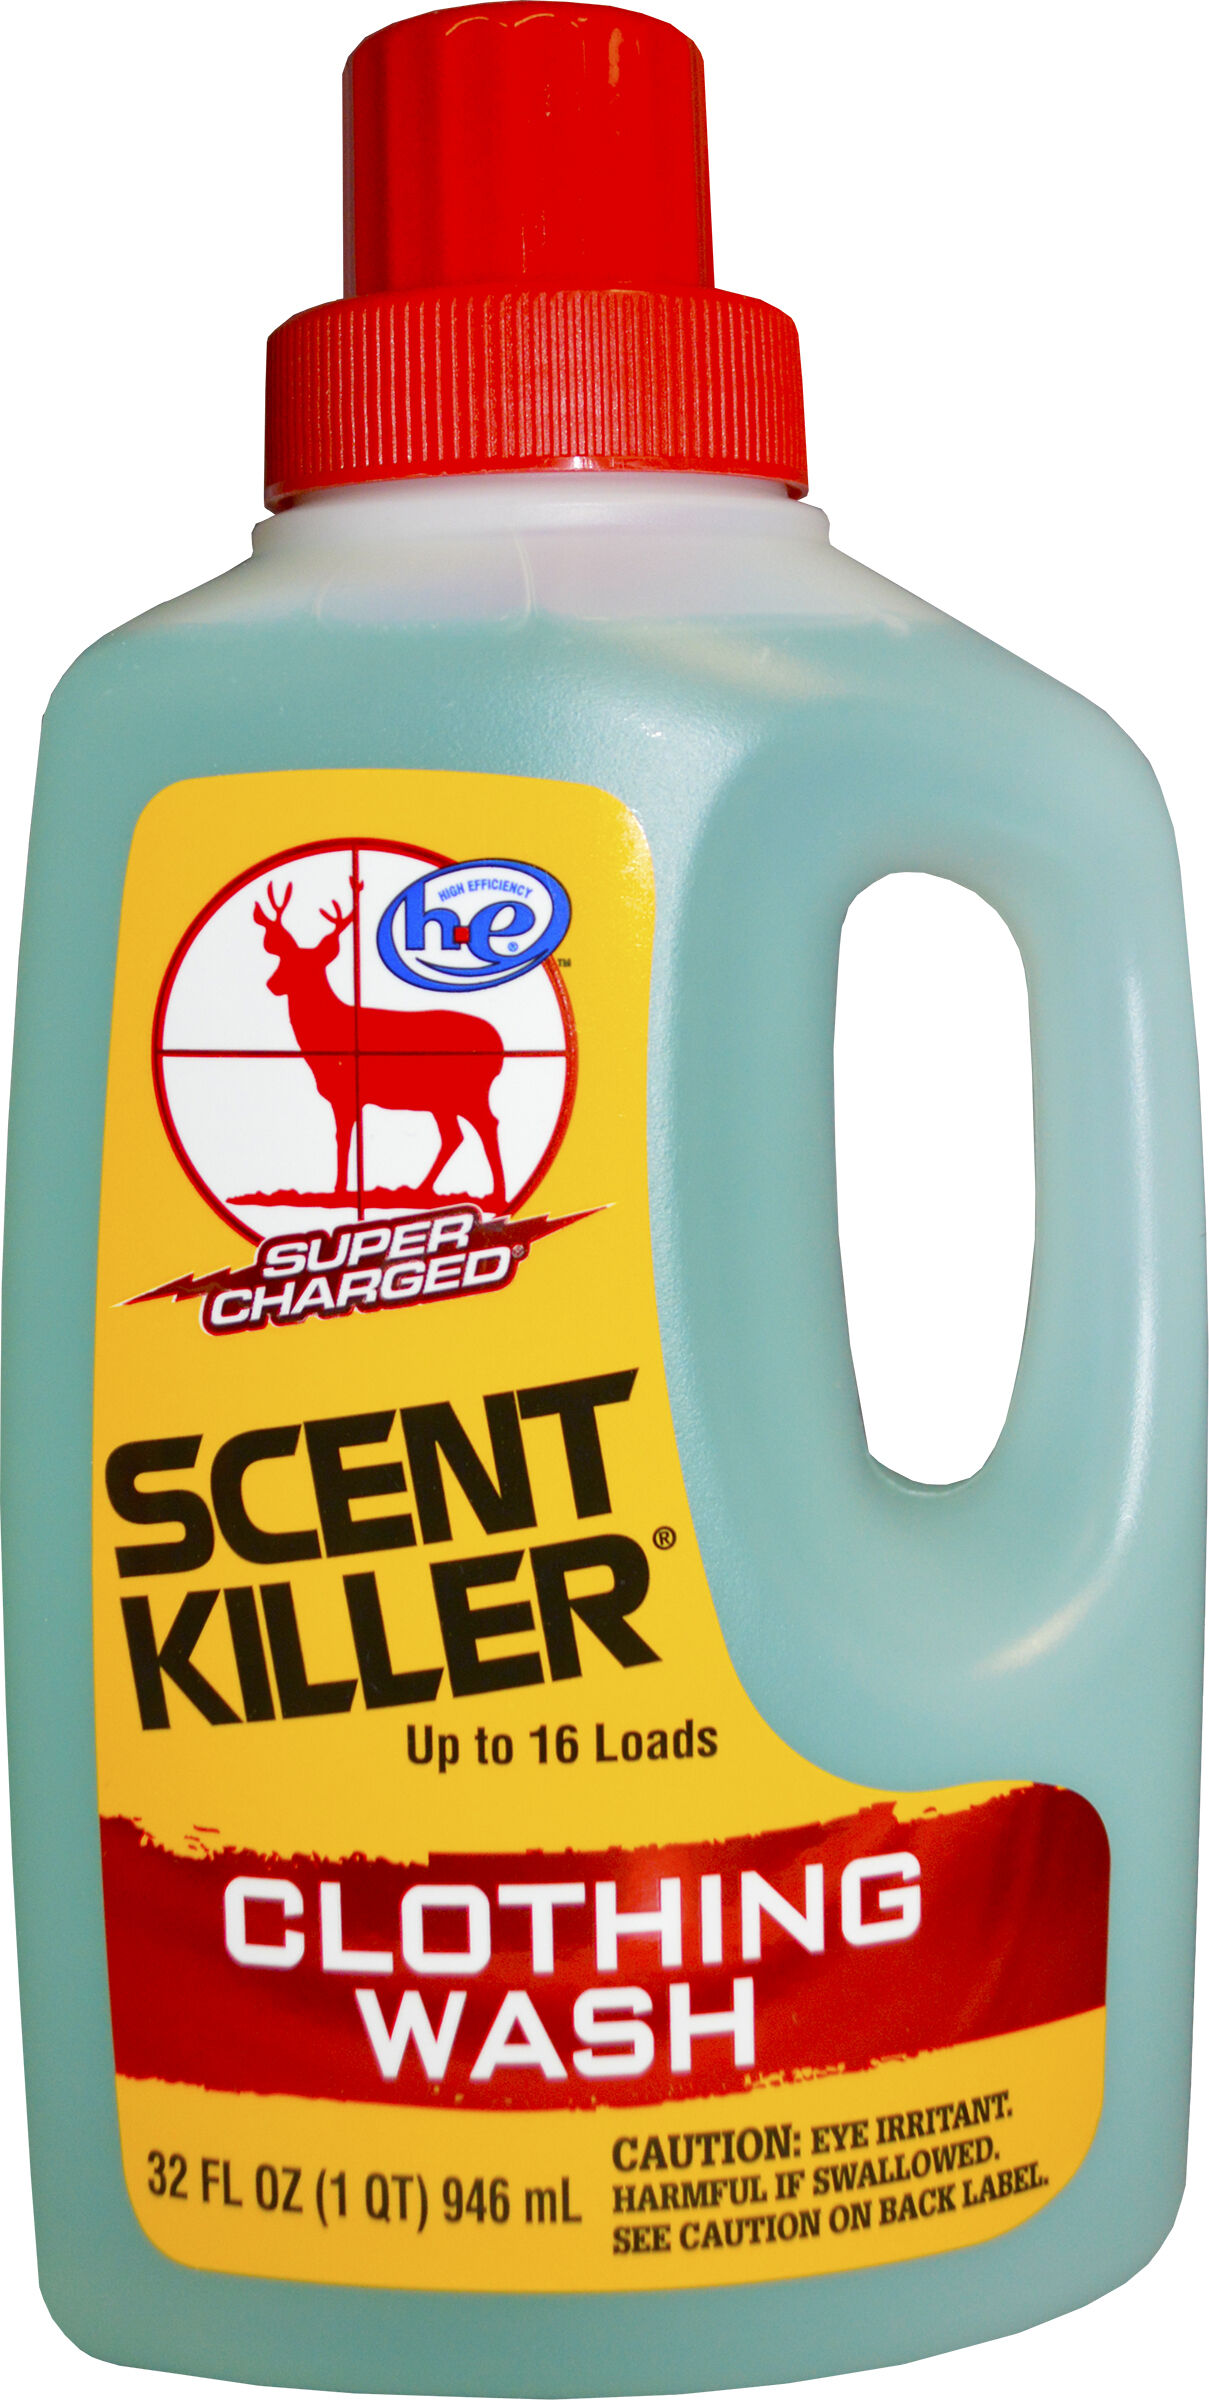 Super Charged Scent Killer Clothing Wash